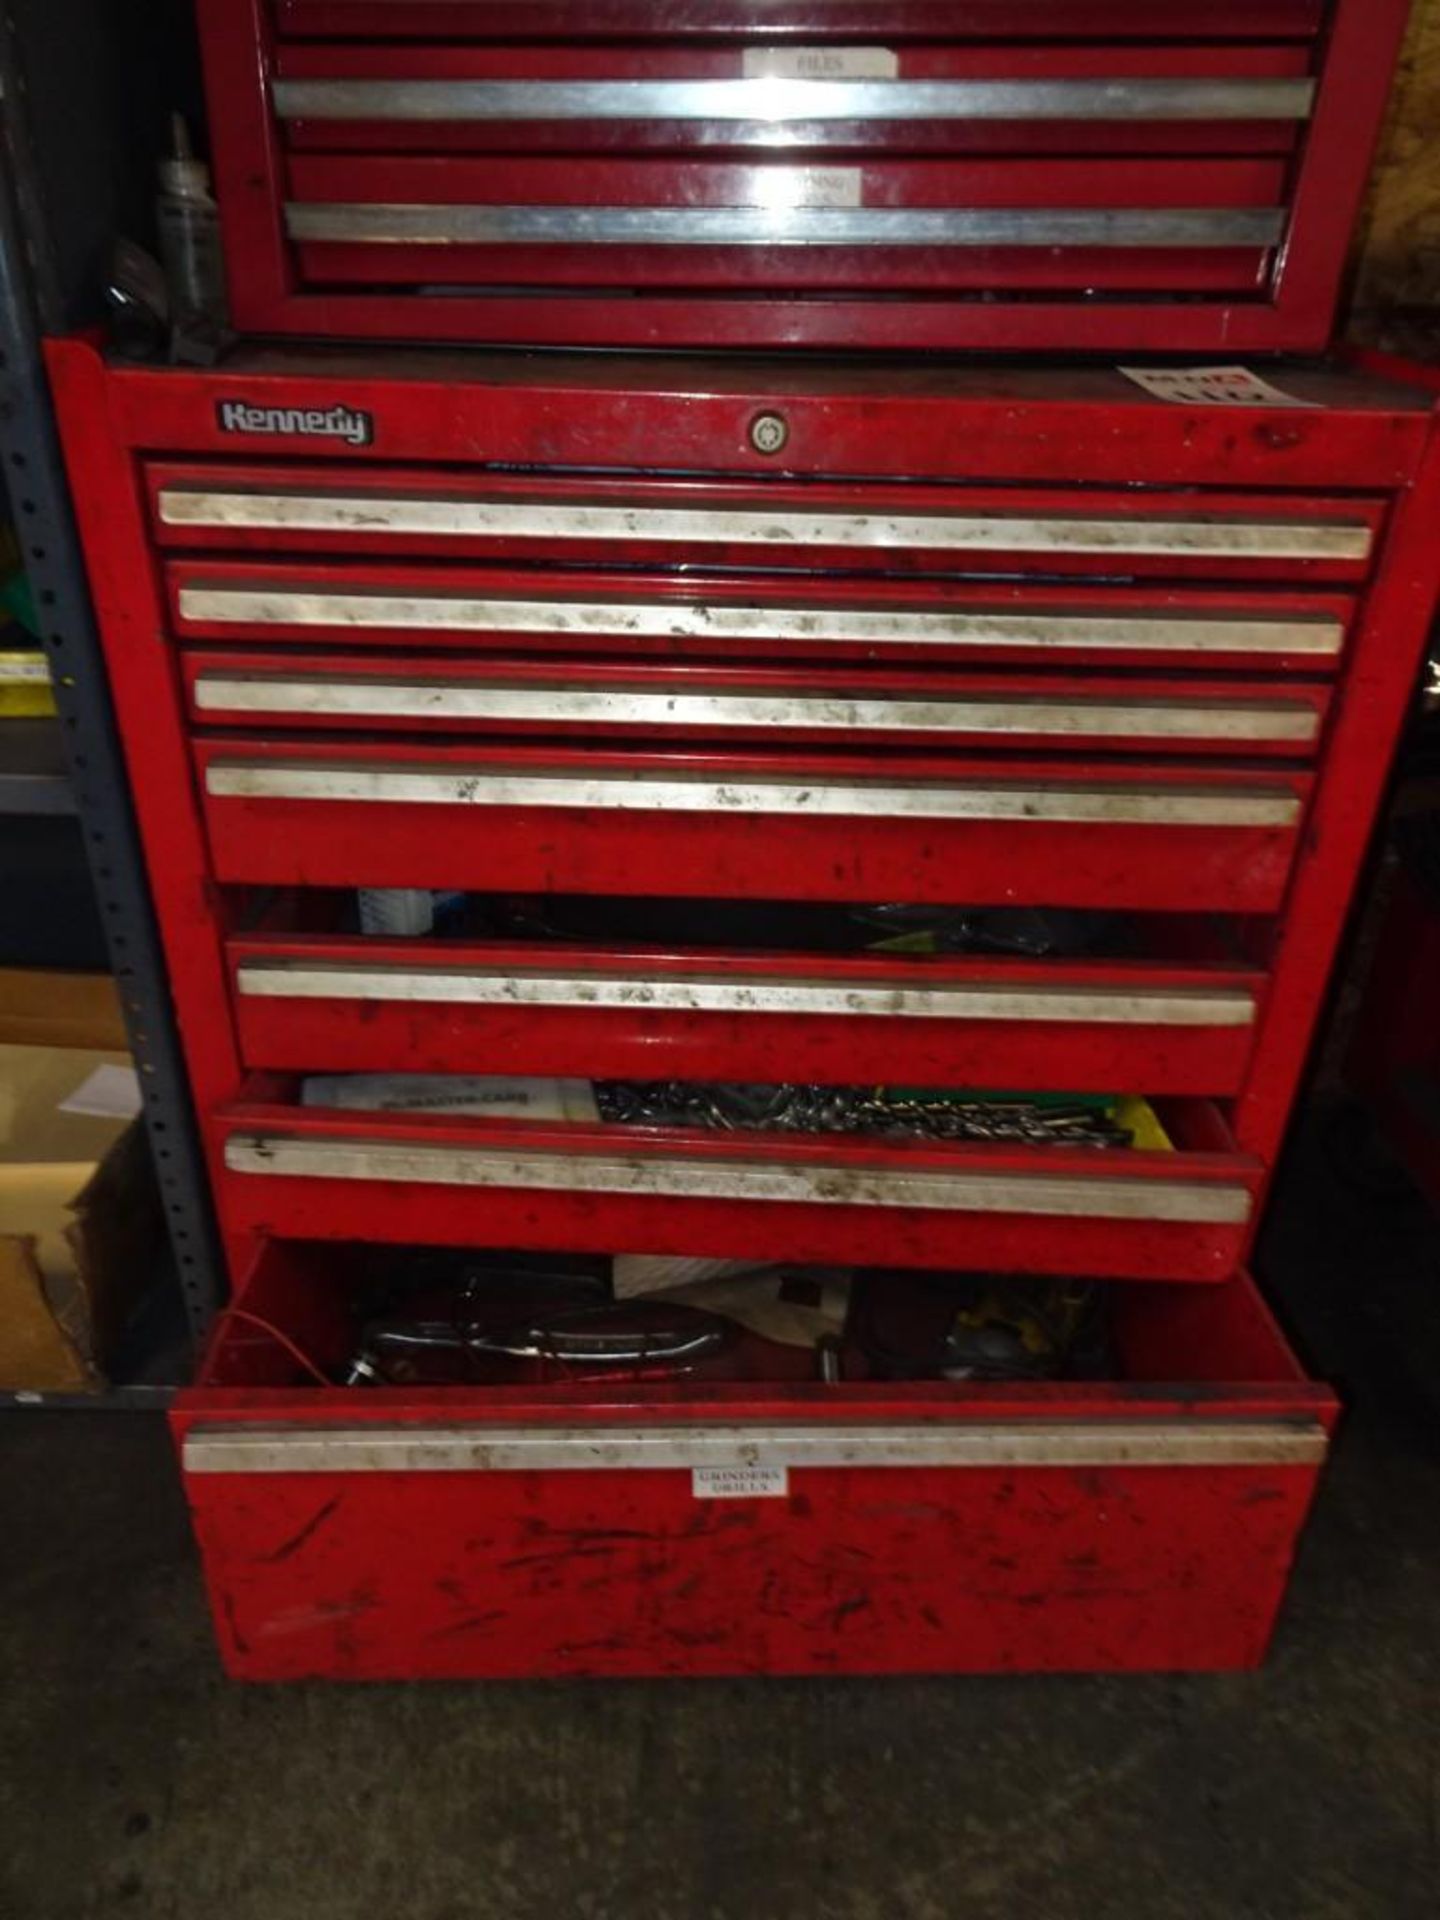 Kennedy 7 Drawer Toolbox w/ Remline 8 Drawer Toolbox - Image 3 of 3